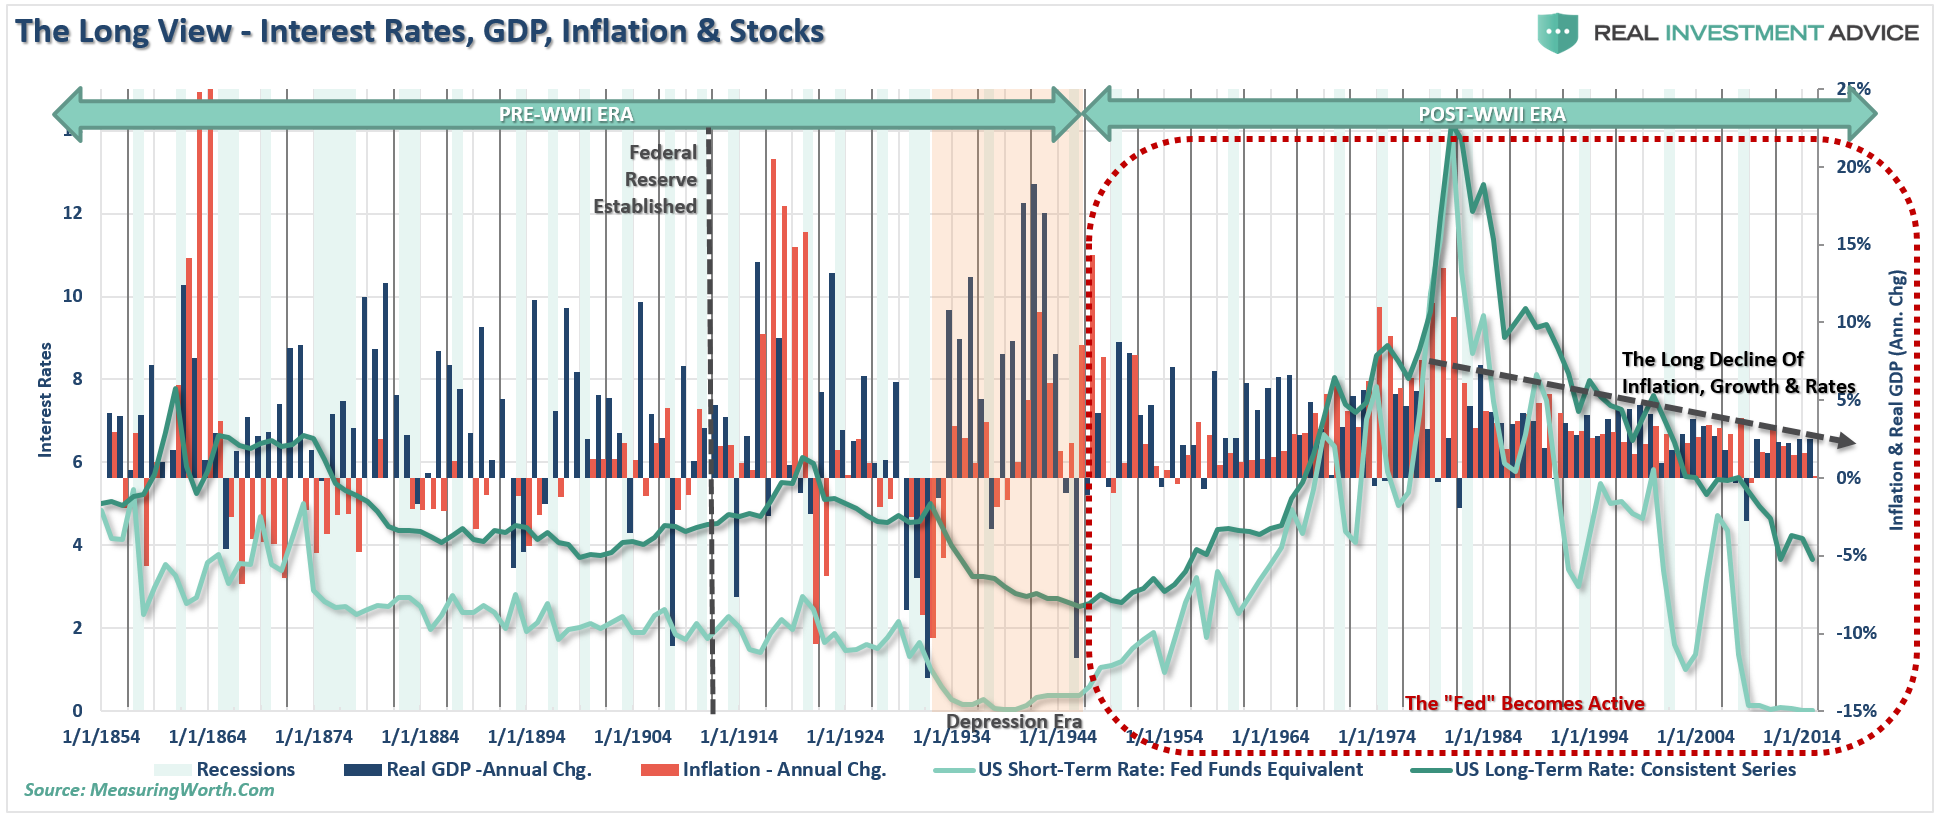 The Long View Interset Rates GDP Inflation & Stock